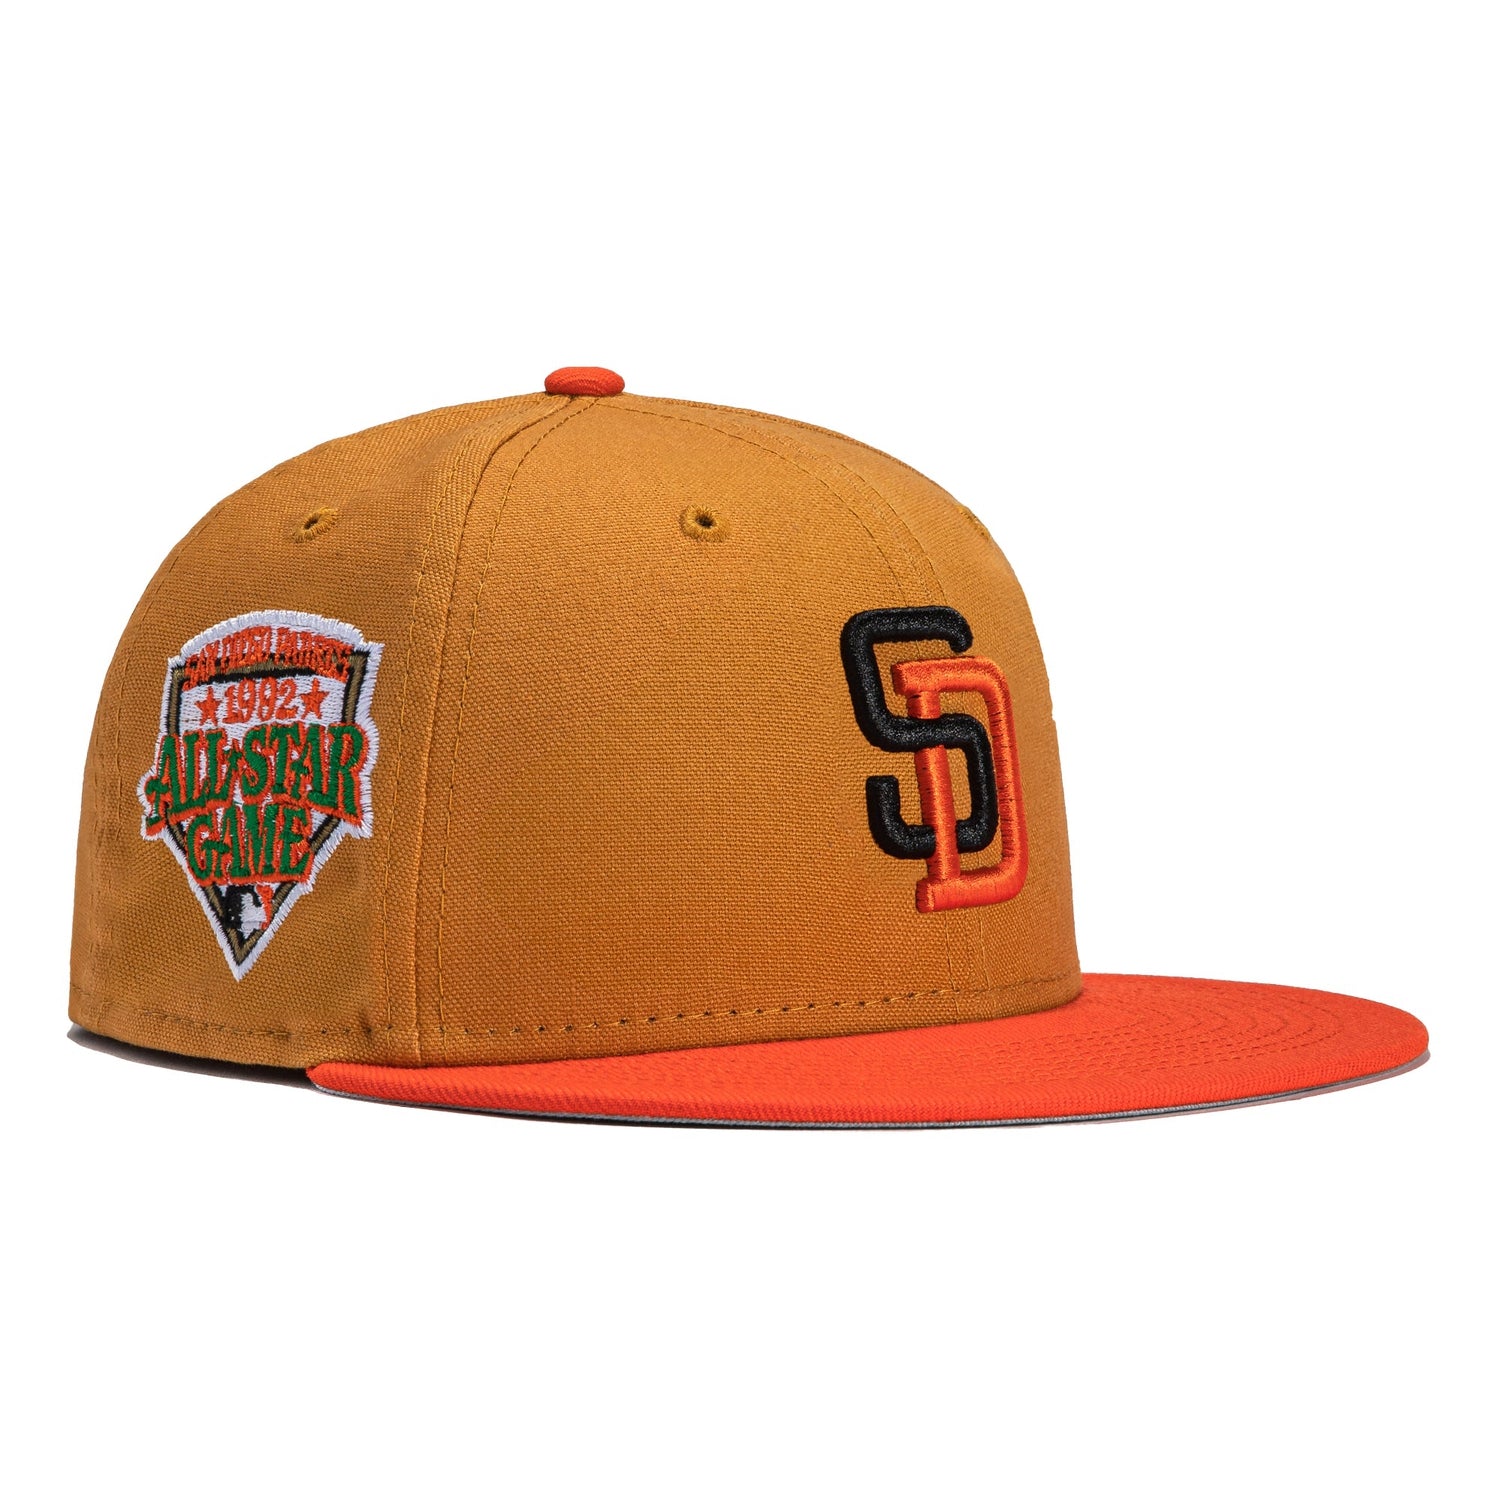 St. Louis Browns Forty Seven Brand 47 Cooperstown Collection Cap Hat